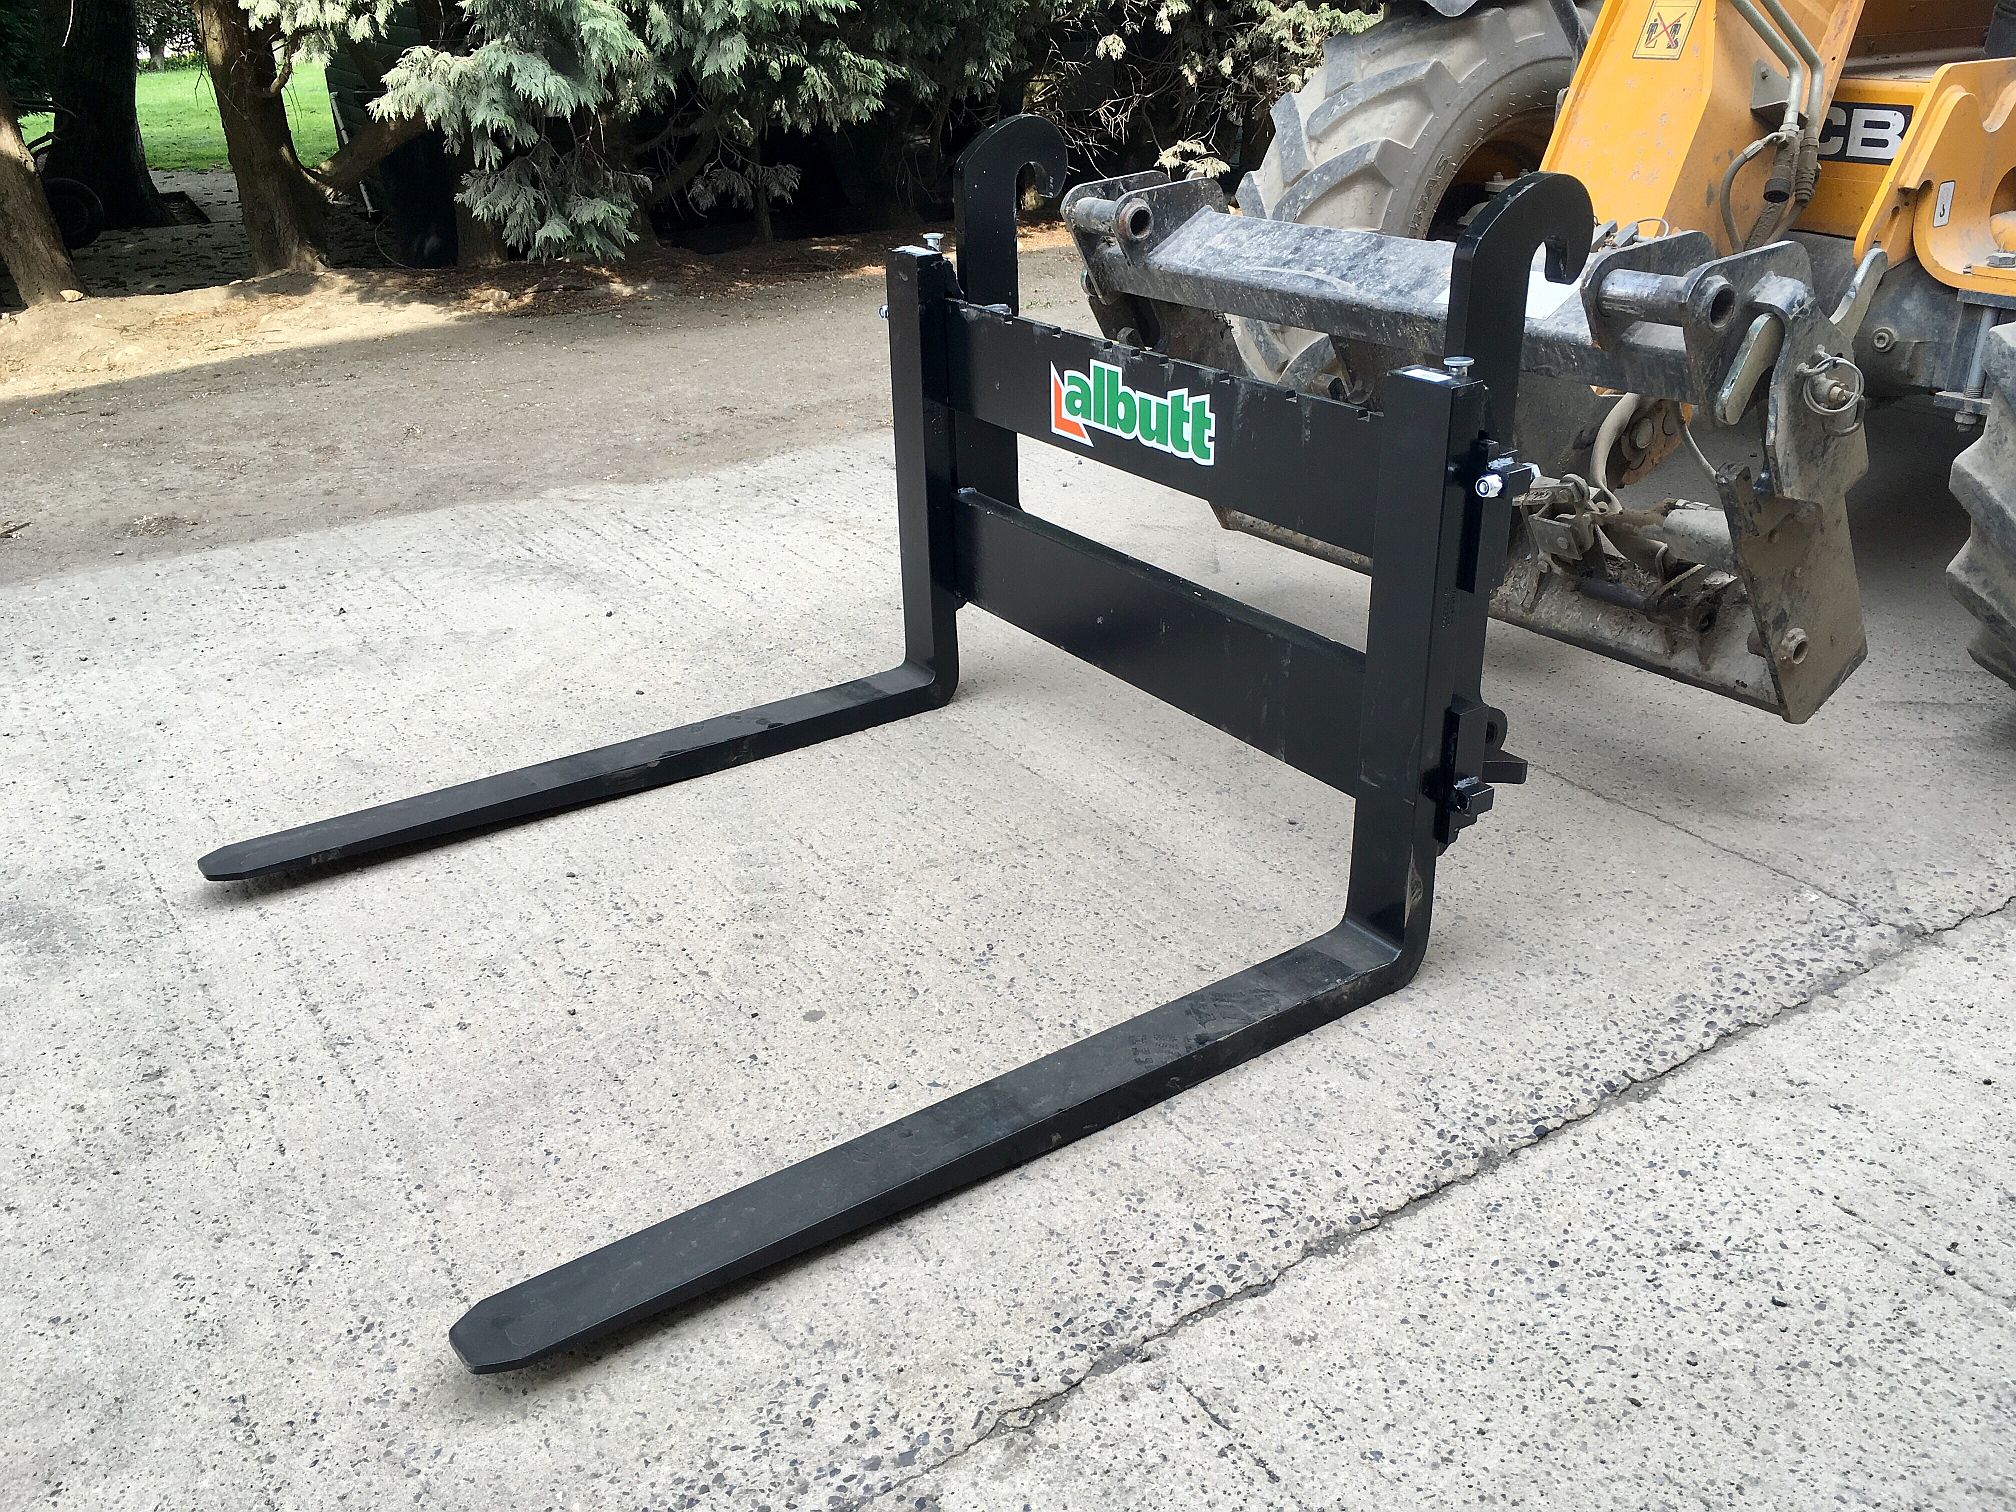 ROUND BAR PALLET FORKS FOR A JCB Q FIT CARRIAGE FREE CARRIAGE 